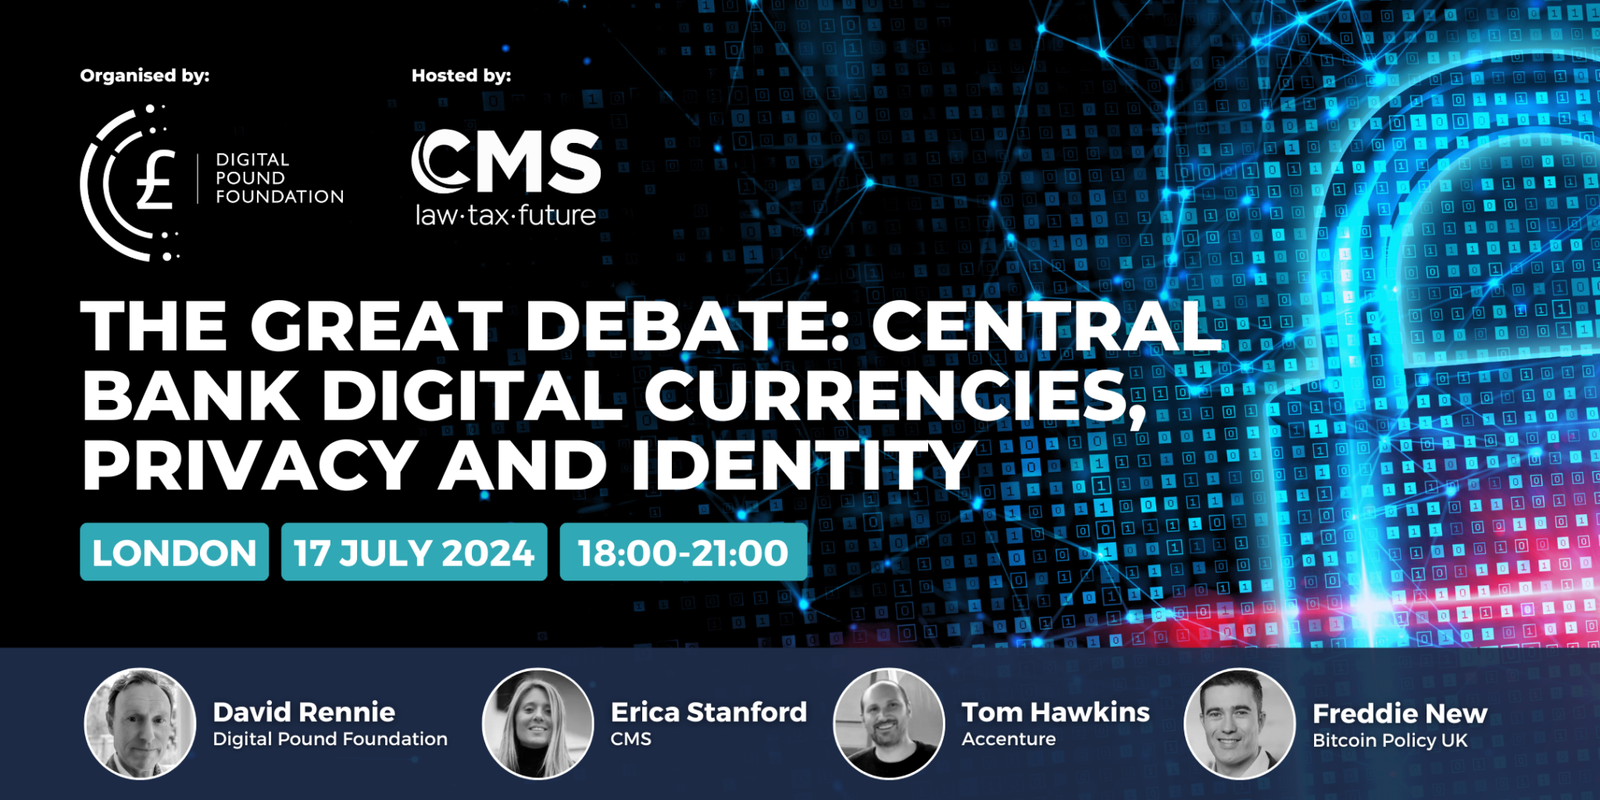 The Great Debate: Central Bank Digital Currencies, Privacy and Identity